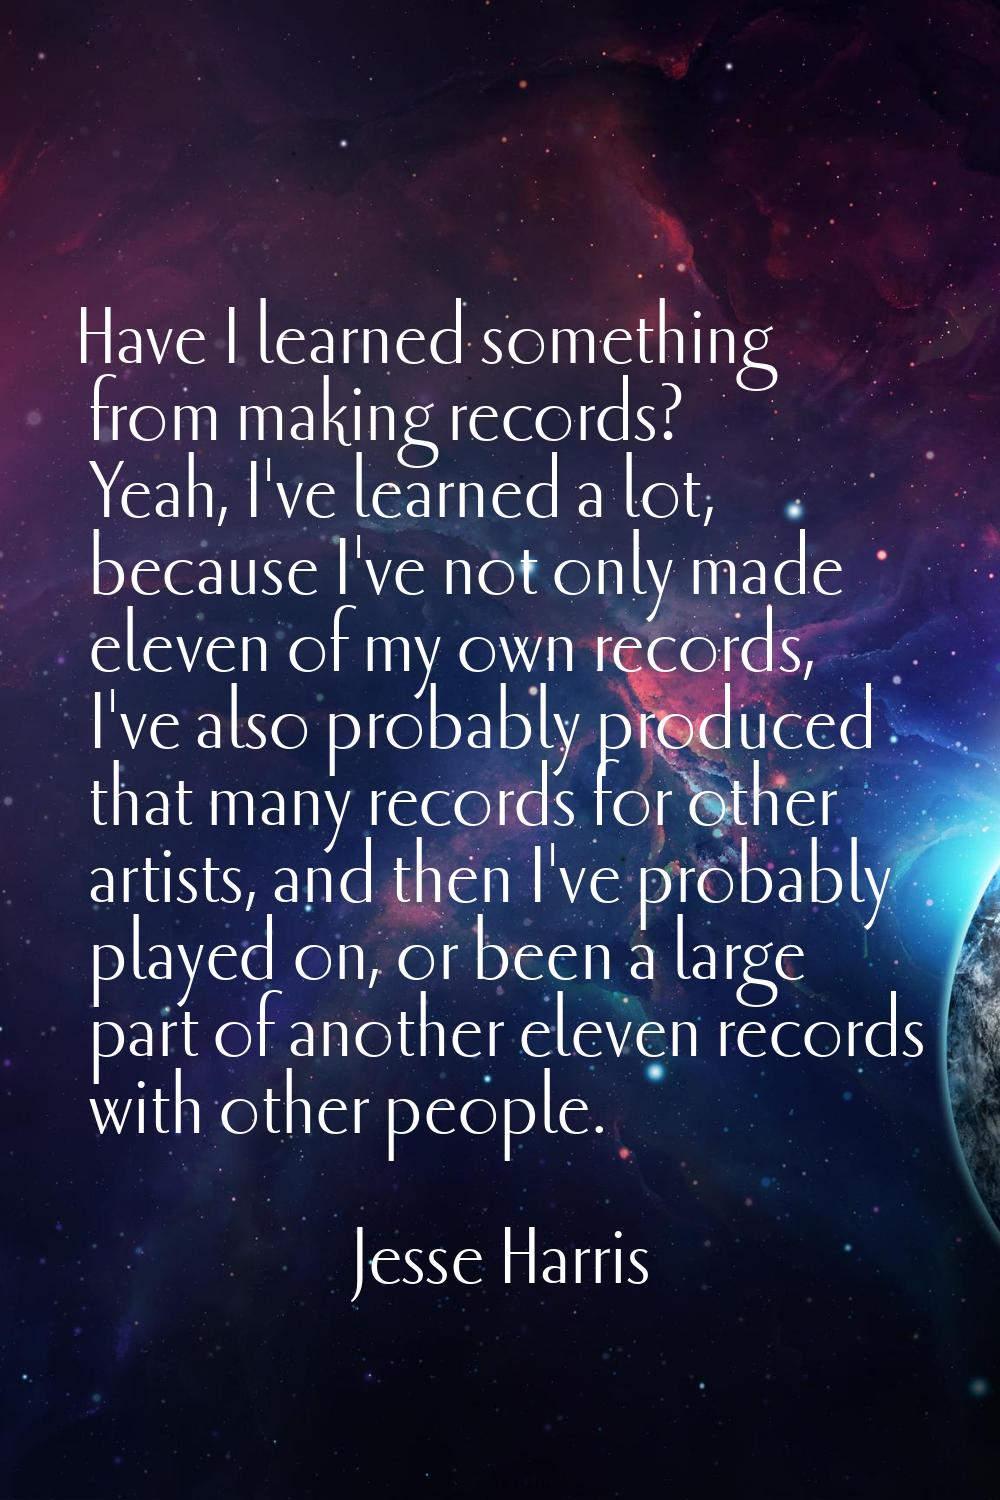 Have I learned something from making records? Yeah, I've learned a lot, because I've not only made 